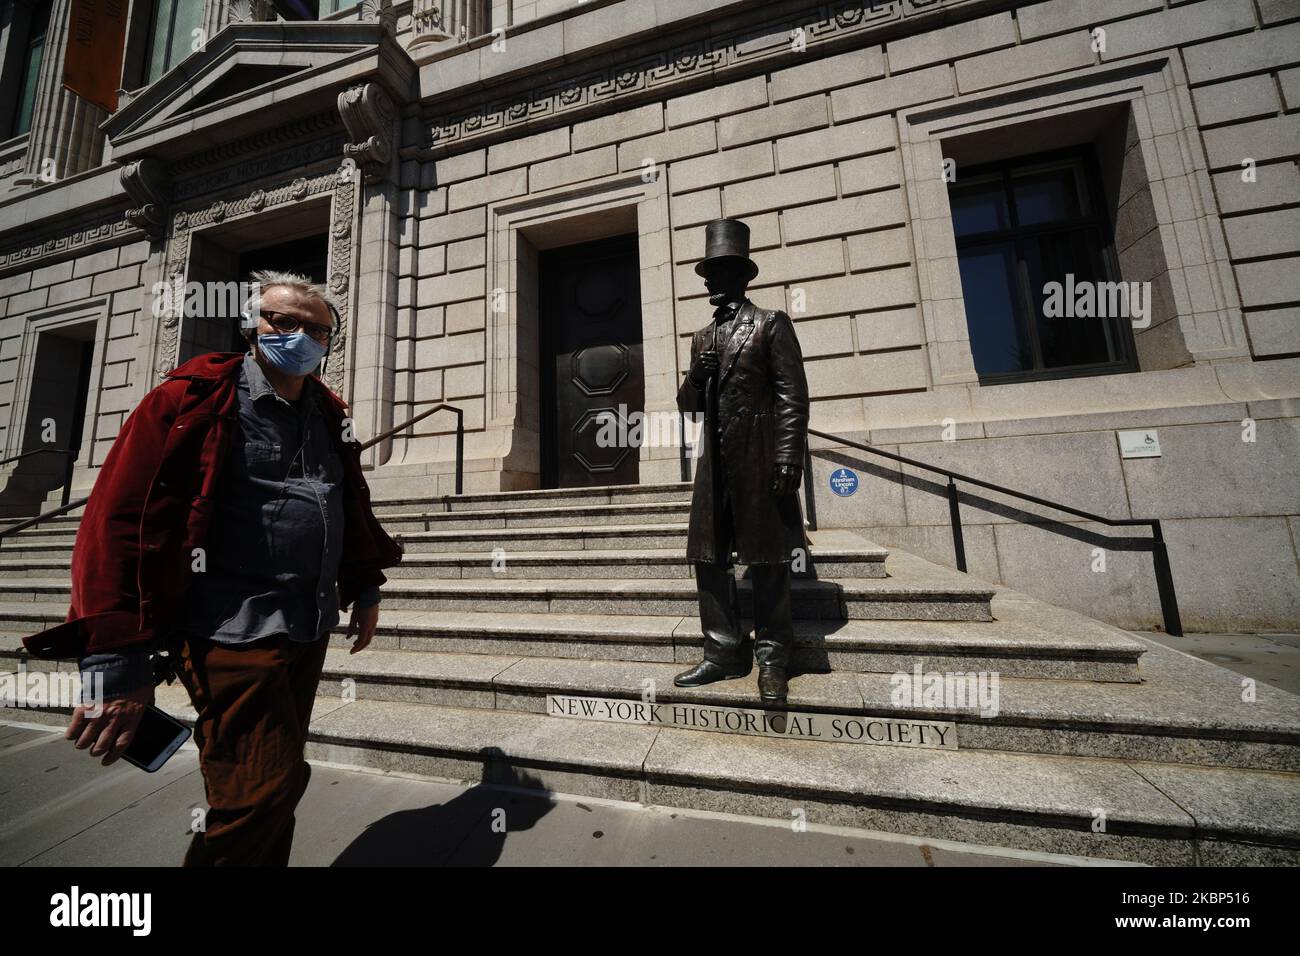 A view of a person wearing a mask outside New York Historical Museum during the coronavirus pandemic on May 20, 2020 in New York City. COVID-19 has spread to most countries around the world, claiming over 316,000 lives with over 4.8 million infections reported. (Photo by John Nacion/NurPhoto) Stock Photo